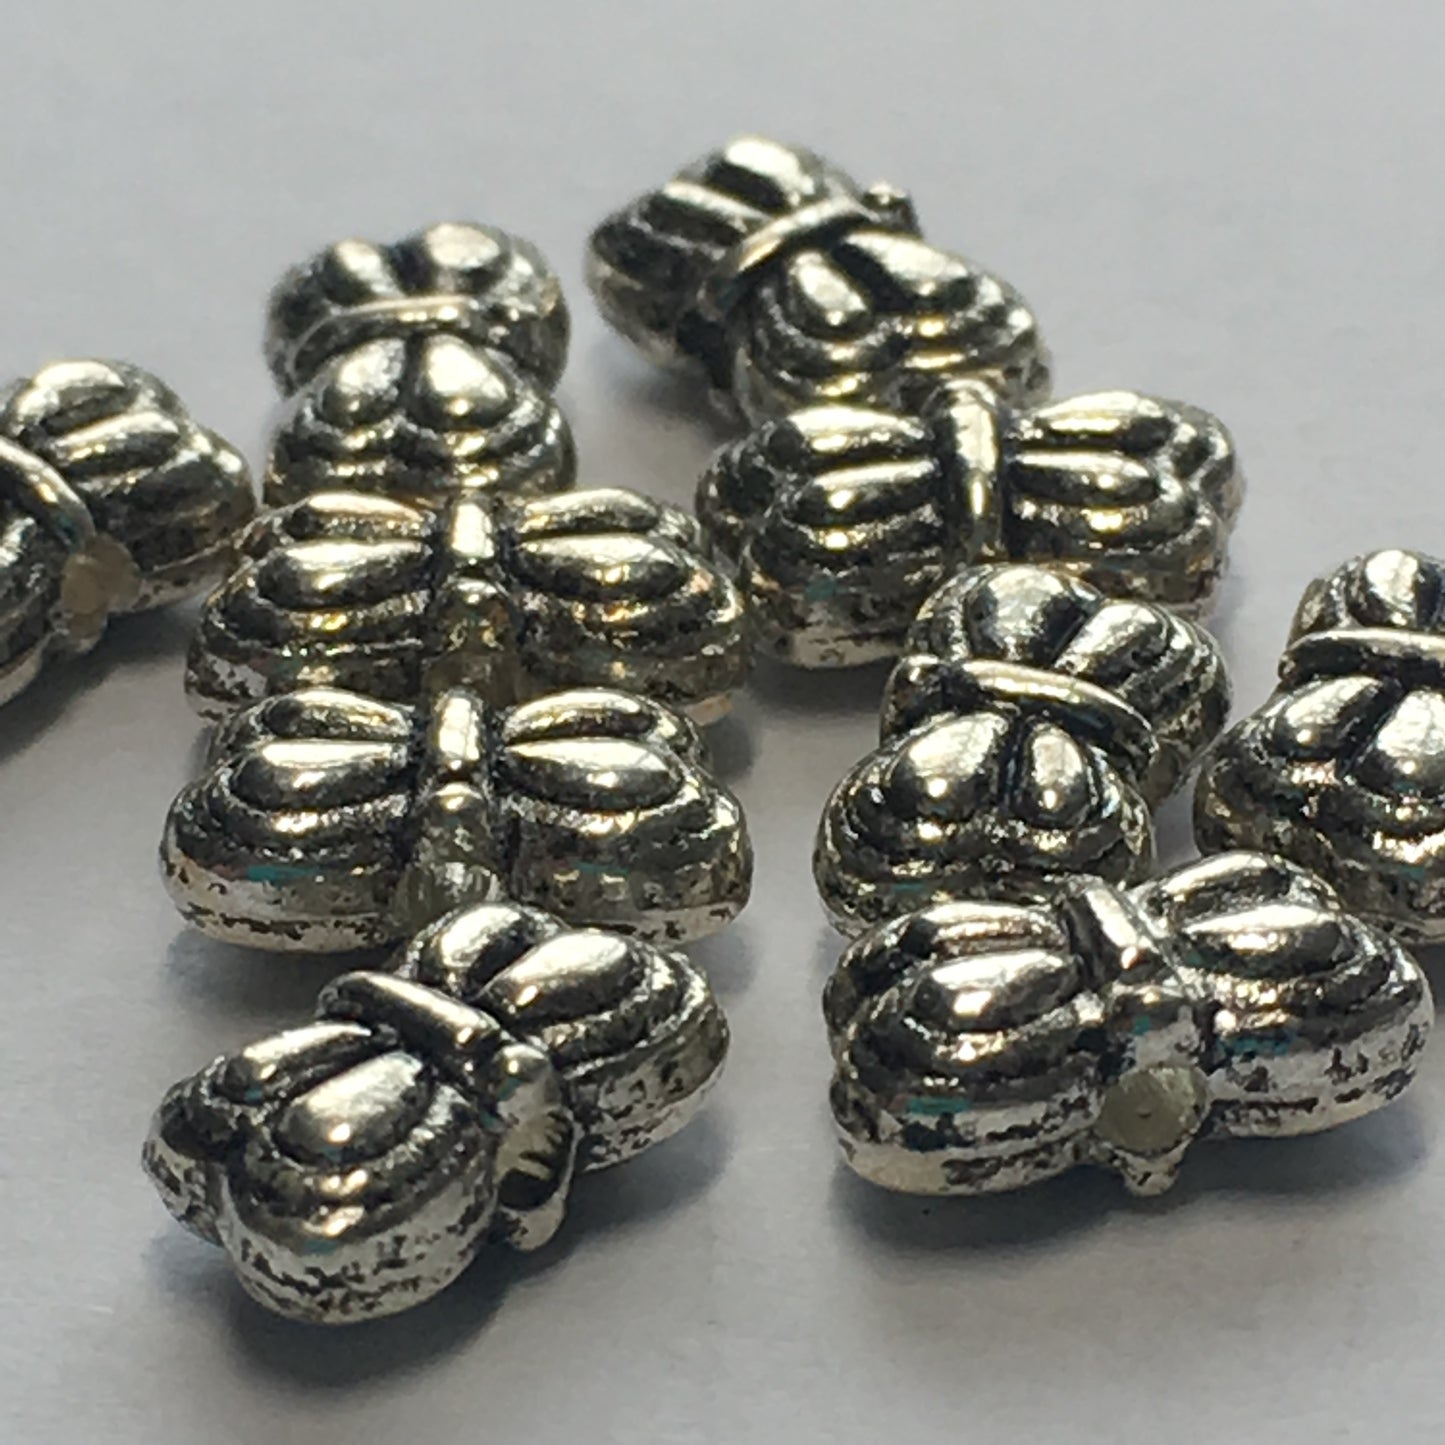 Antique Silver Butterfly Beads, 5 x 9 mm - 5 or 10 Beads